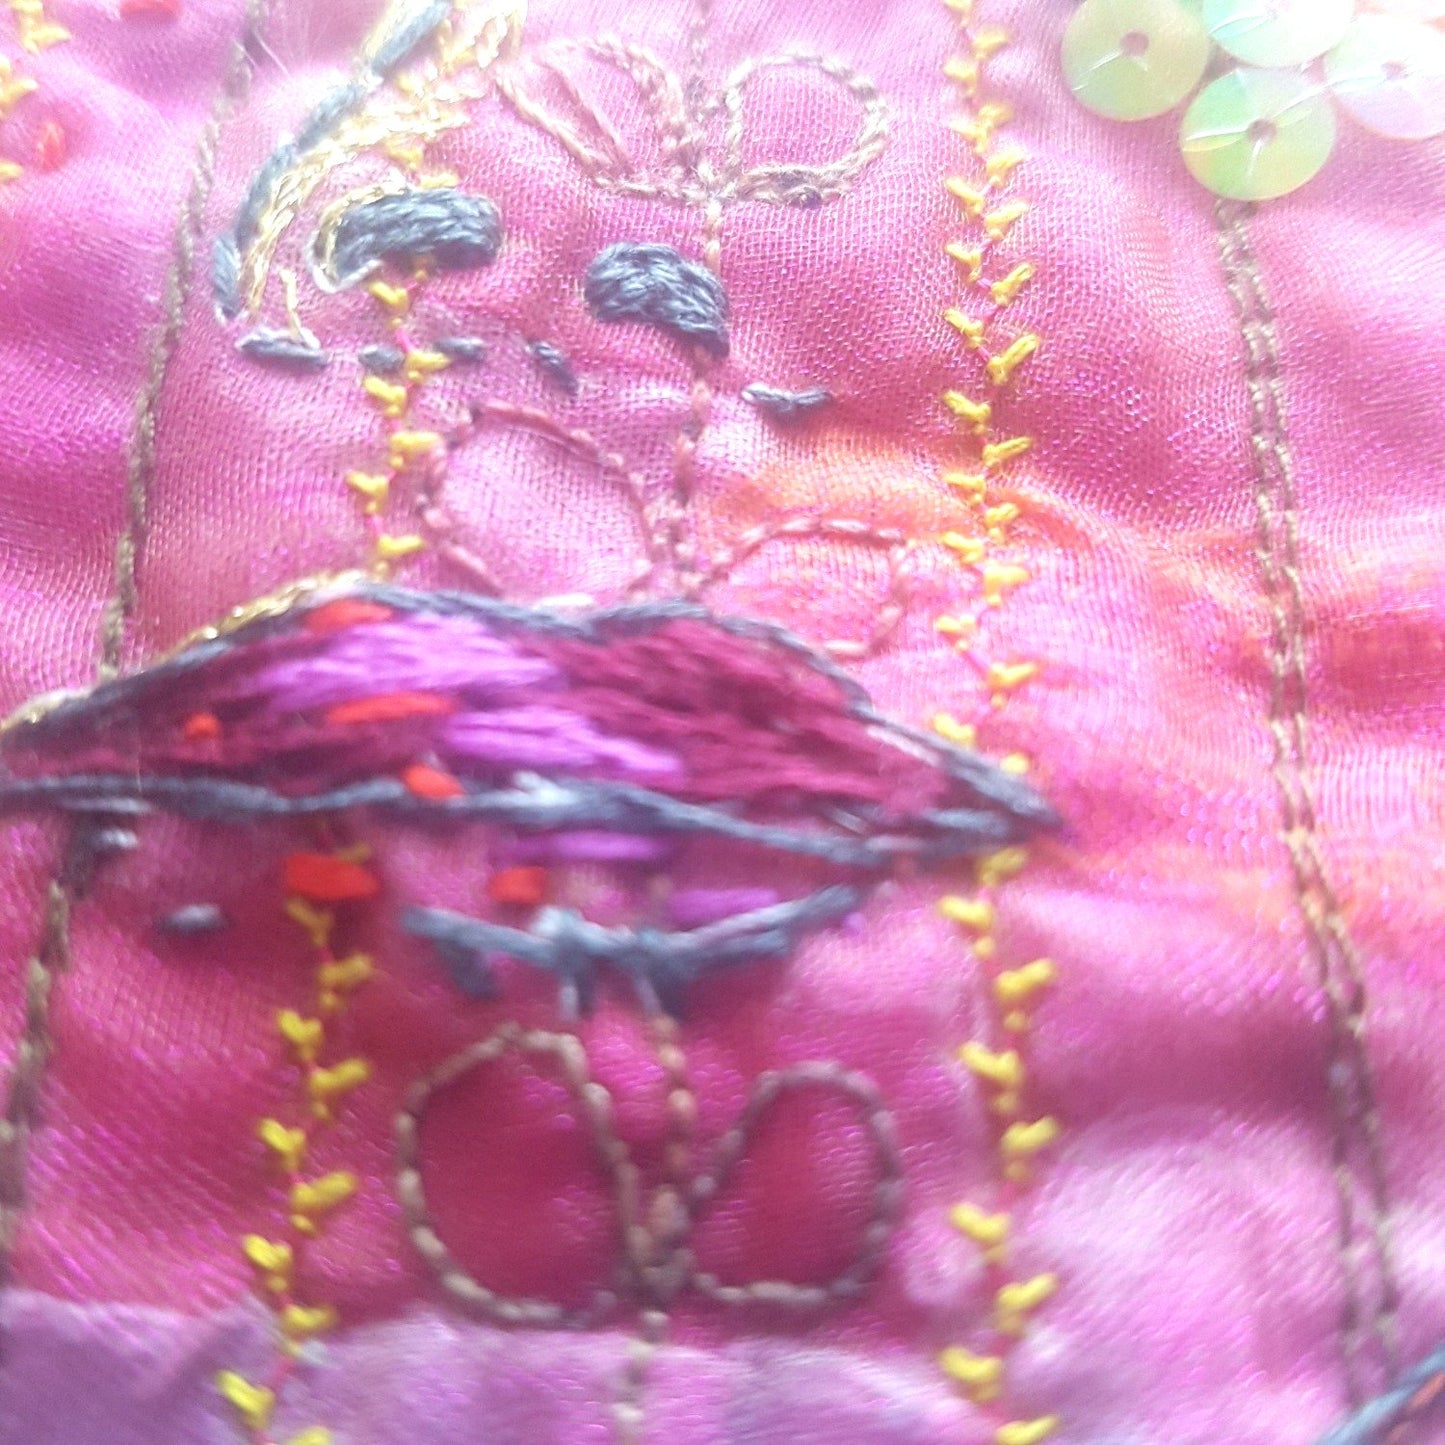 embroidery detail of lips